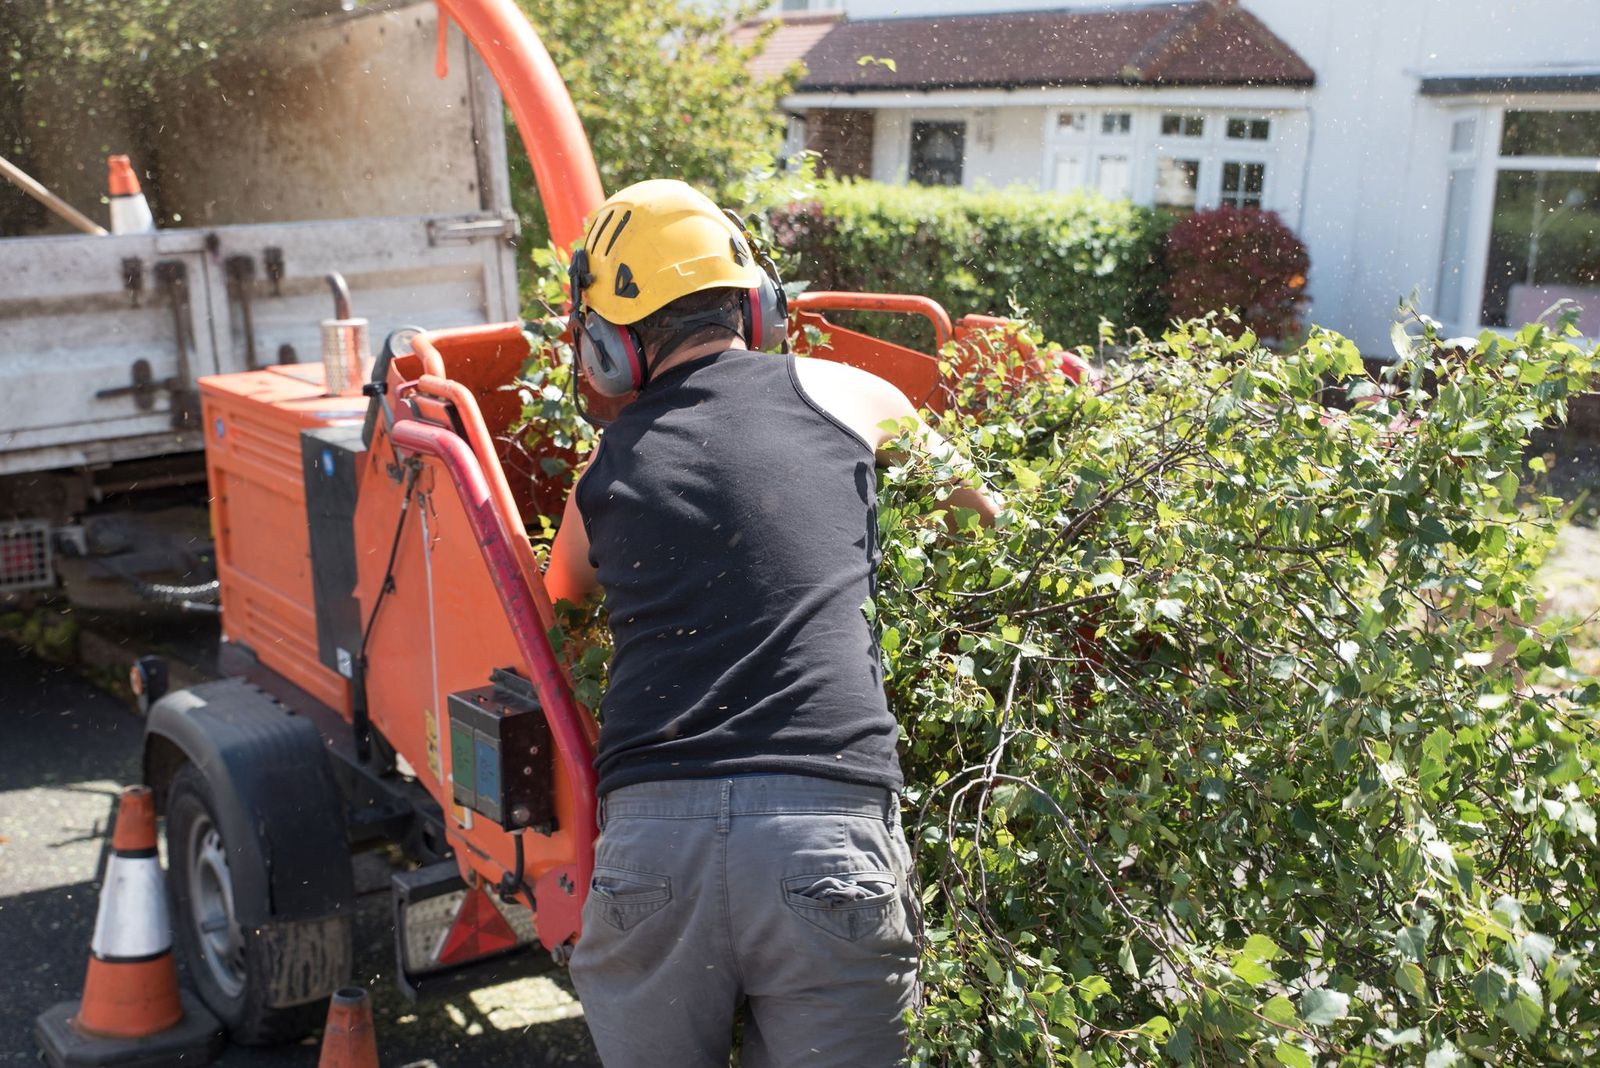 Hiring The Best Tree Removal Company For Your Needs